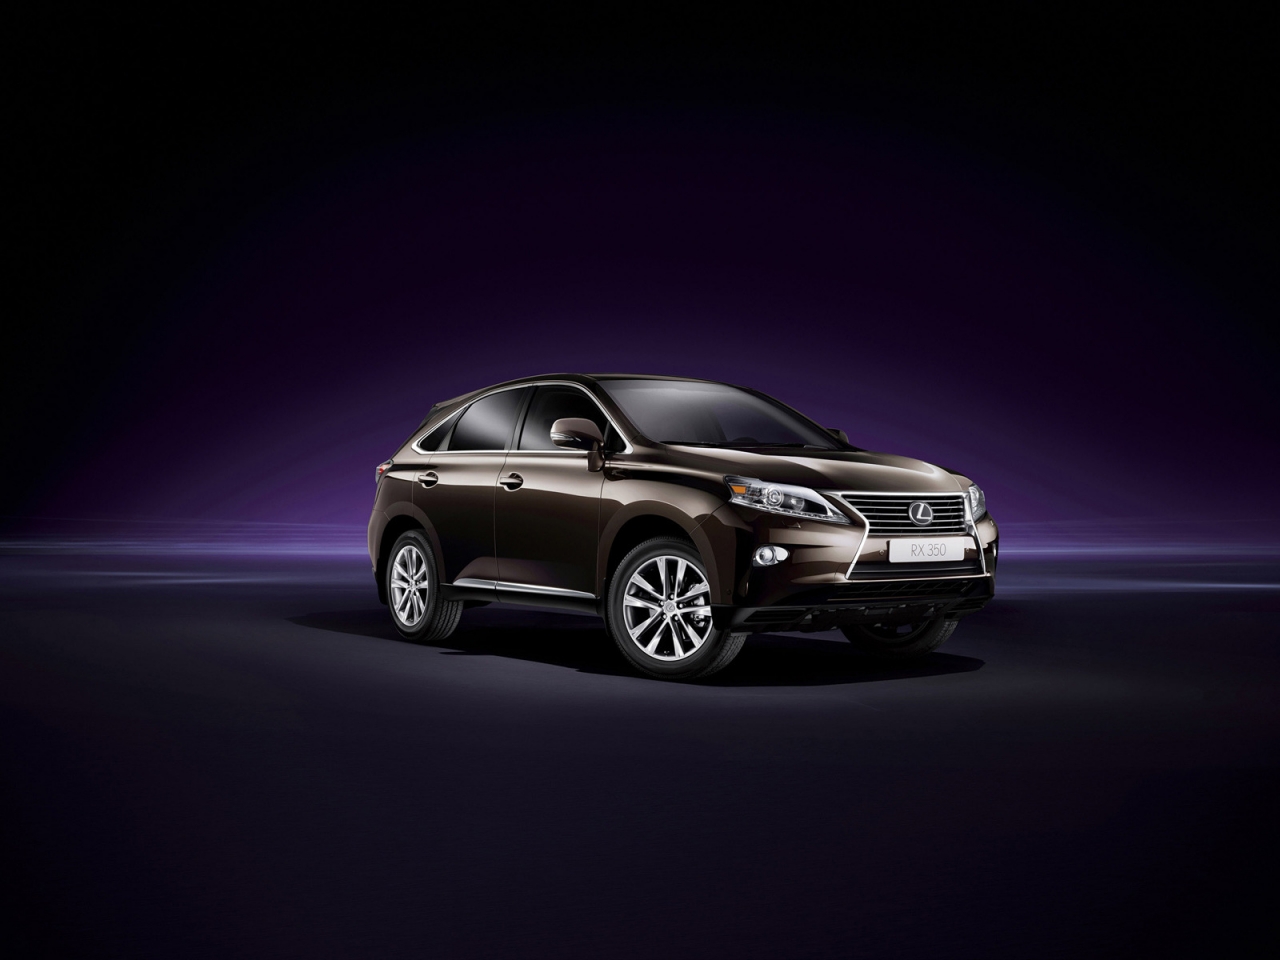 Lexus RX 350H 2013 for 1280 x 960 resolution